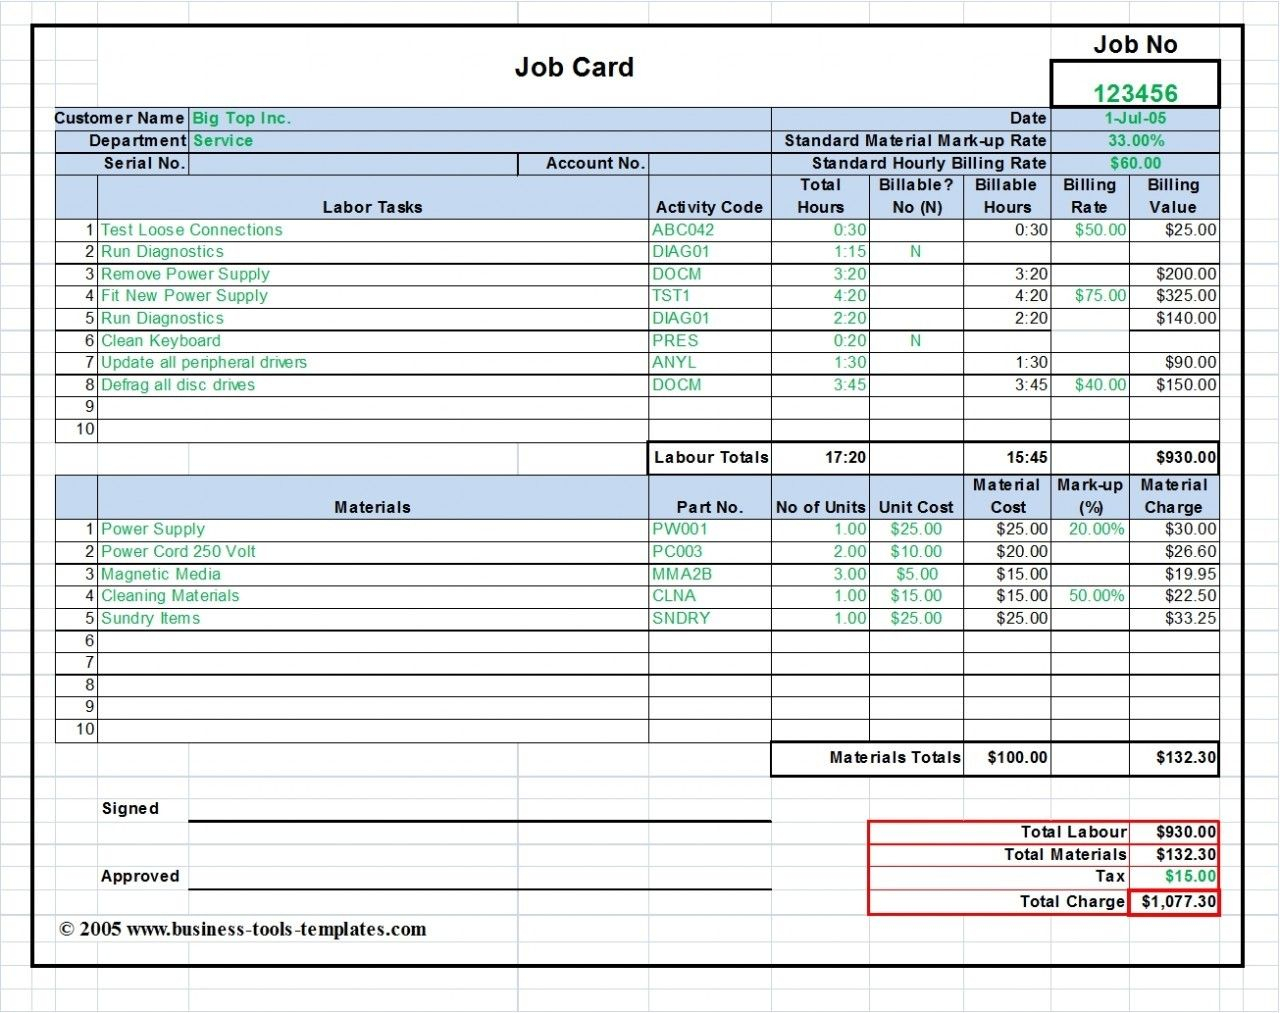 Workshop Job Card Template Excel, Labor & Material Cost In Sample Job Cards Templates